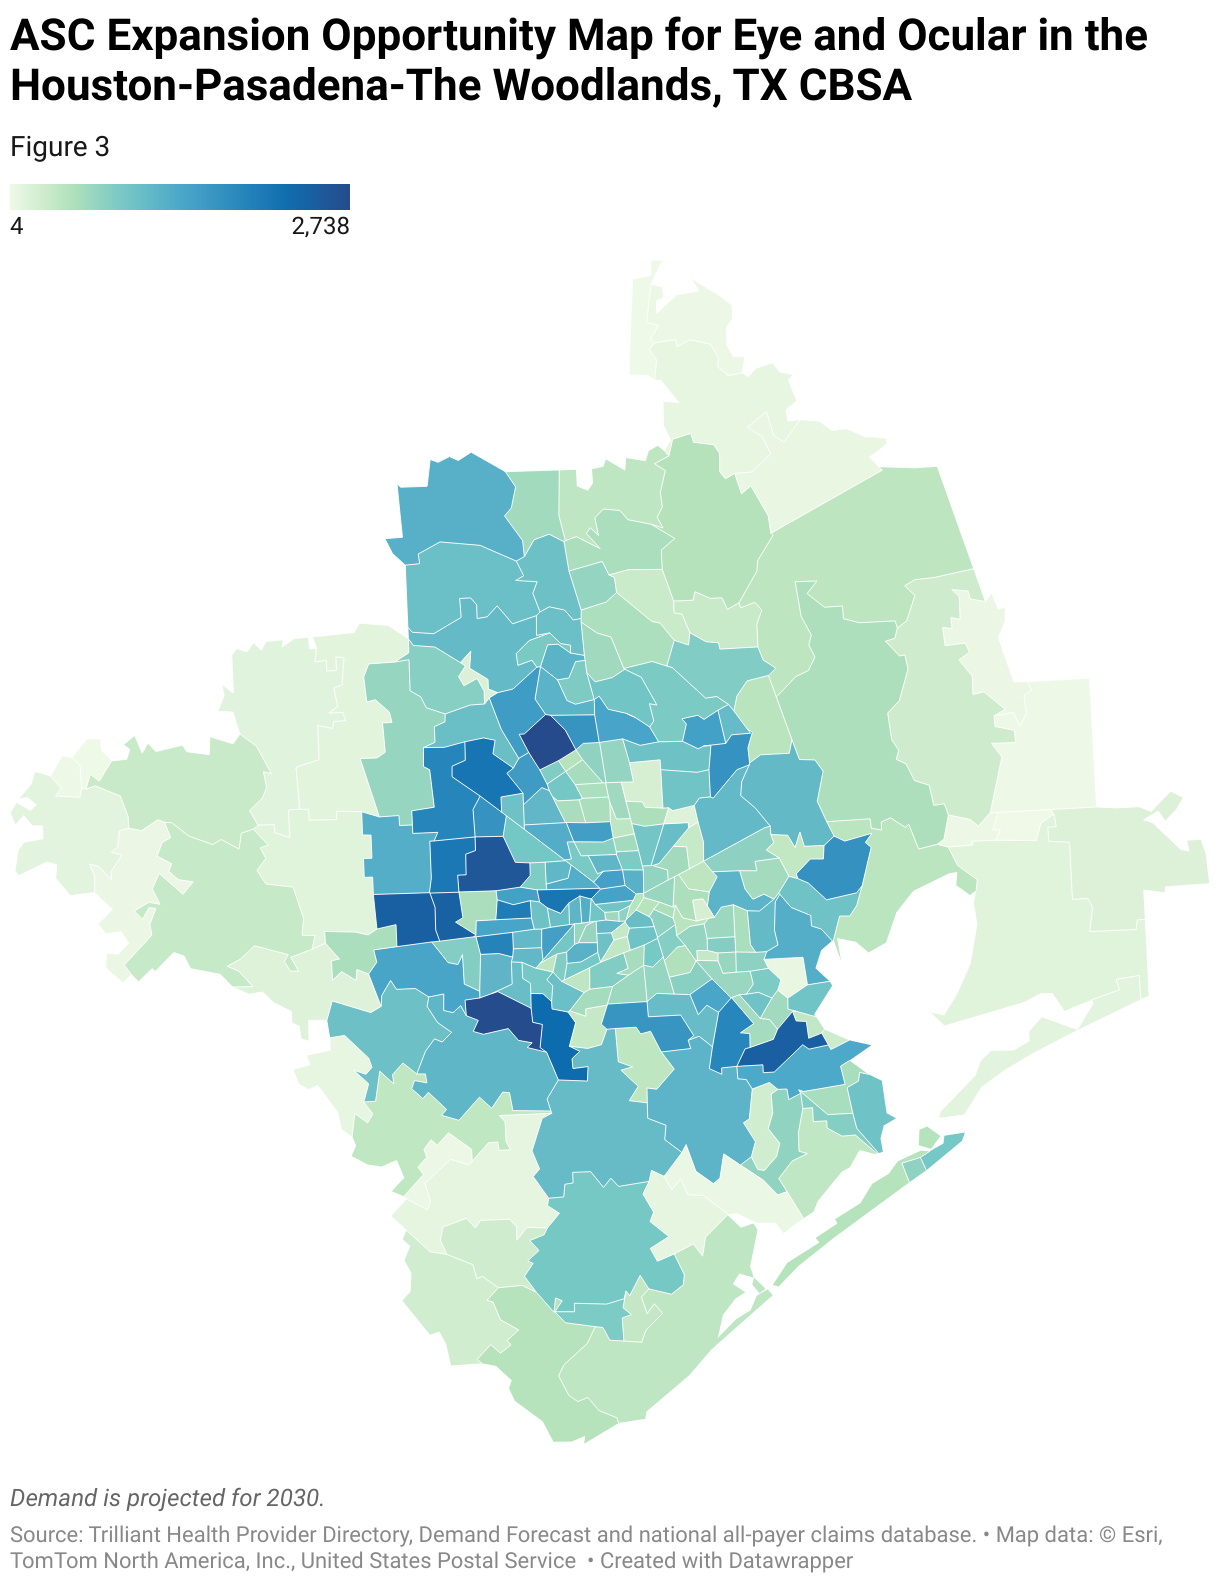 A ZIP-Code level heatmap that analyzes supply and demand for eye and ocular services in the Houston-Pasadena-The Woodlands, TX CBSA.